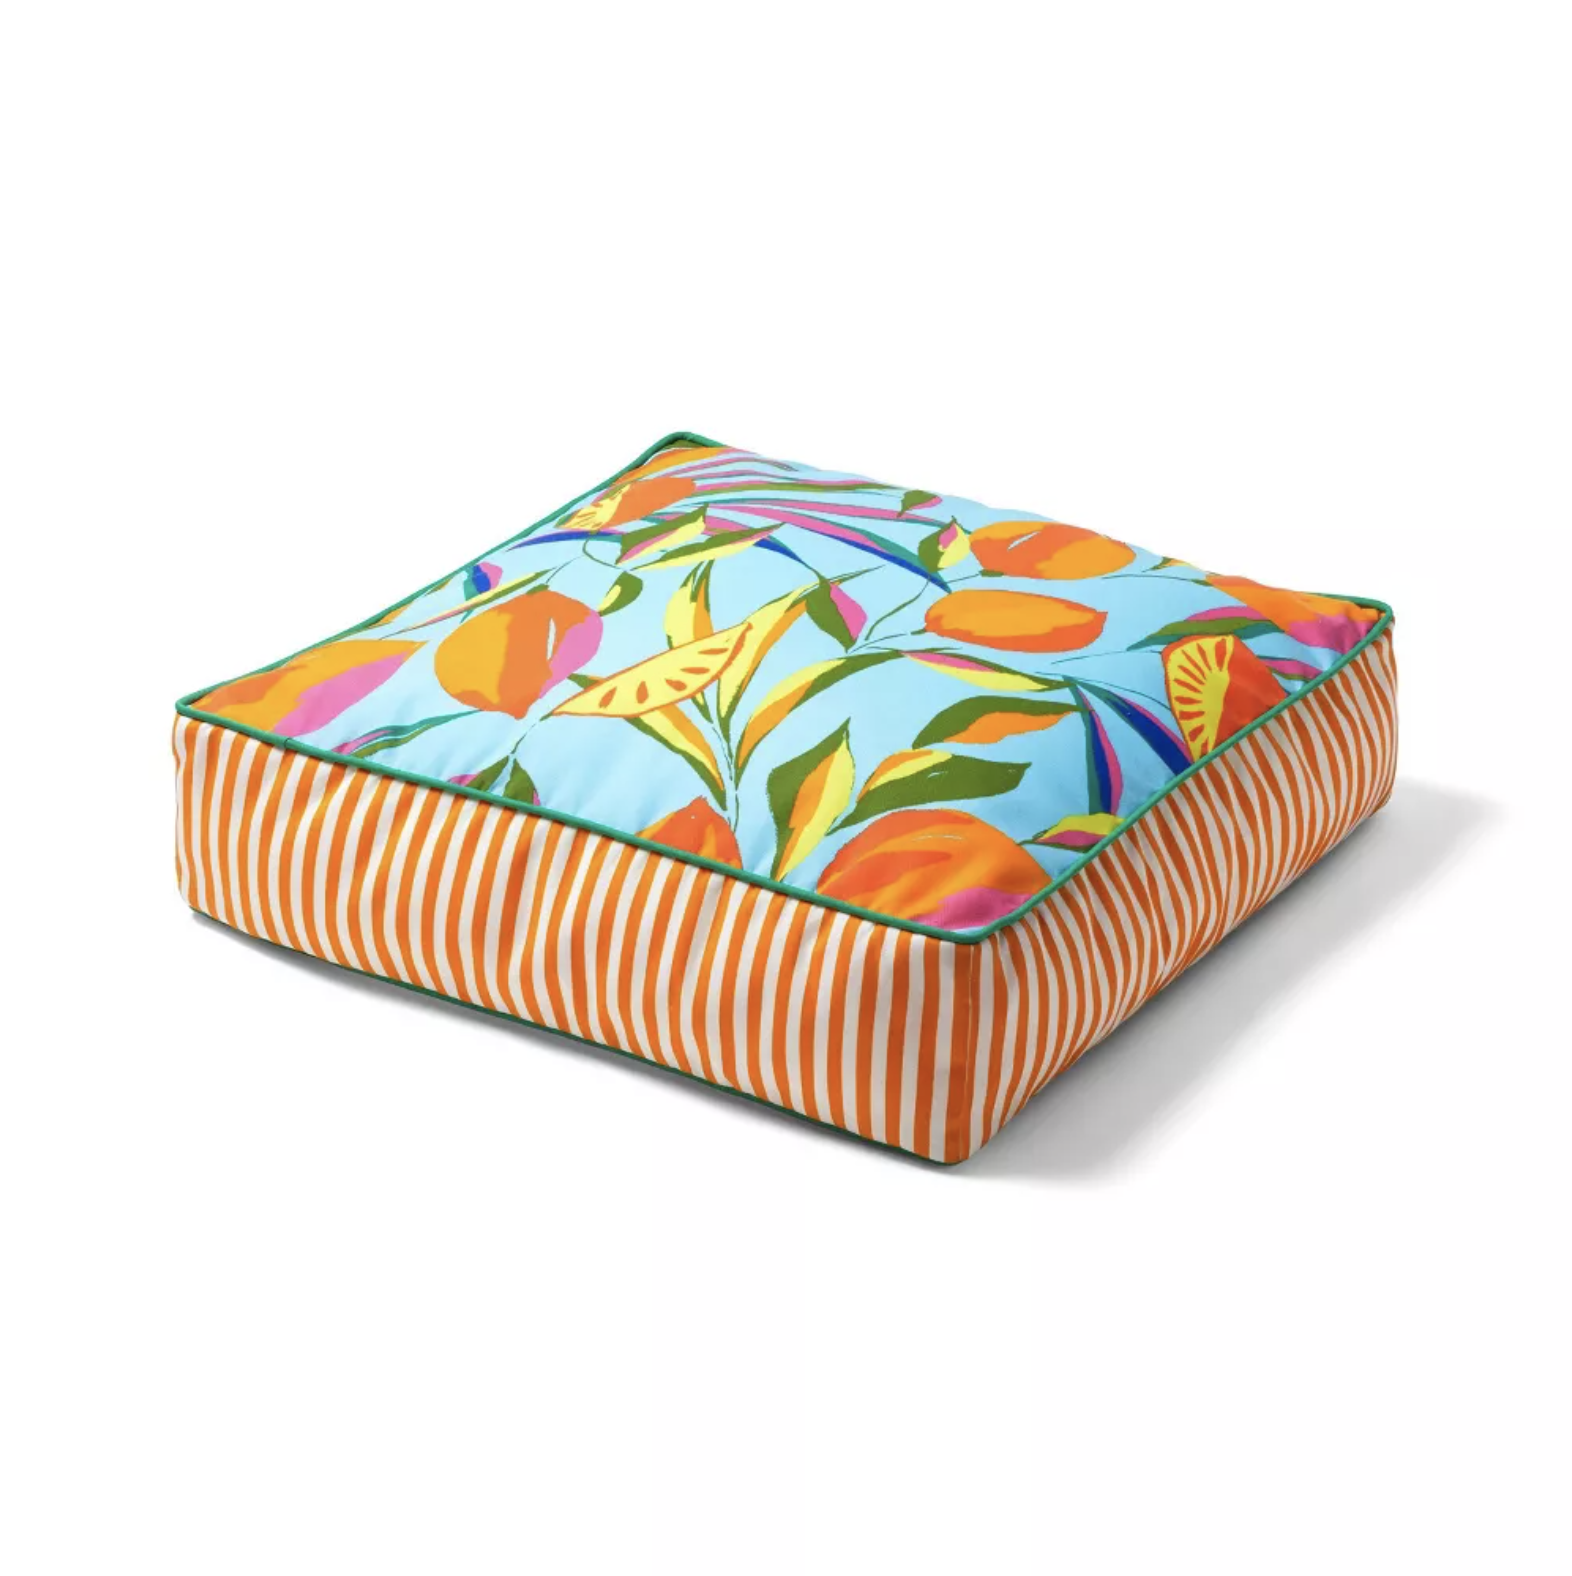 Fruit and striped covered soft floor cushion